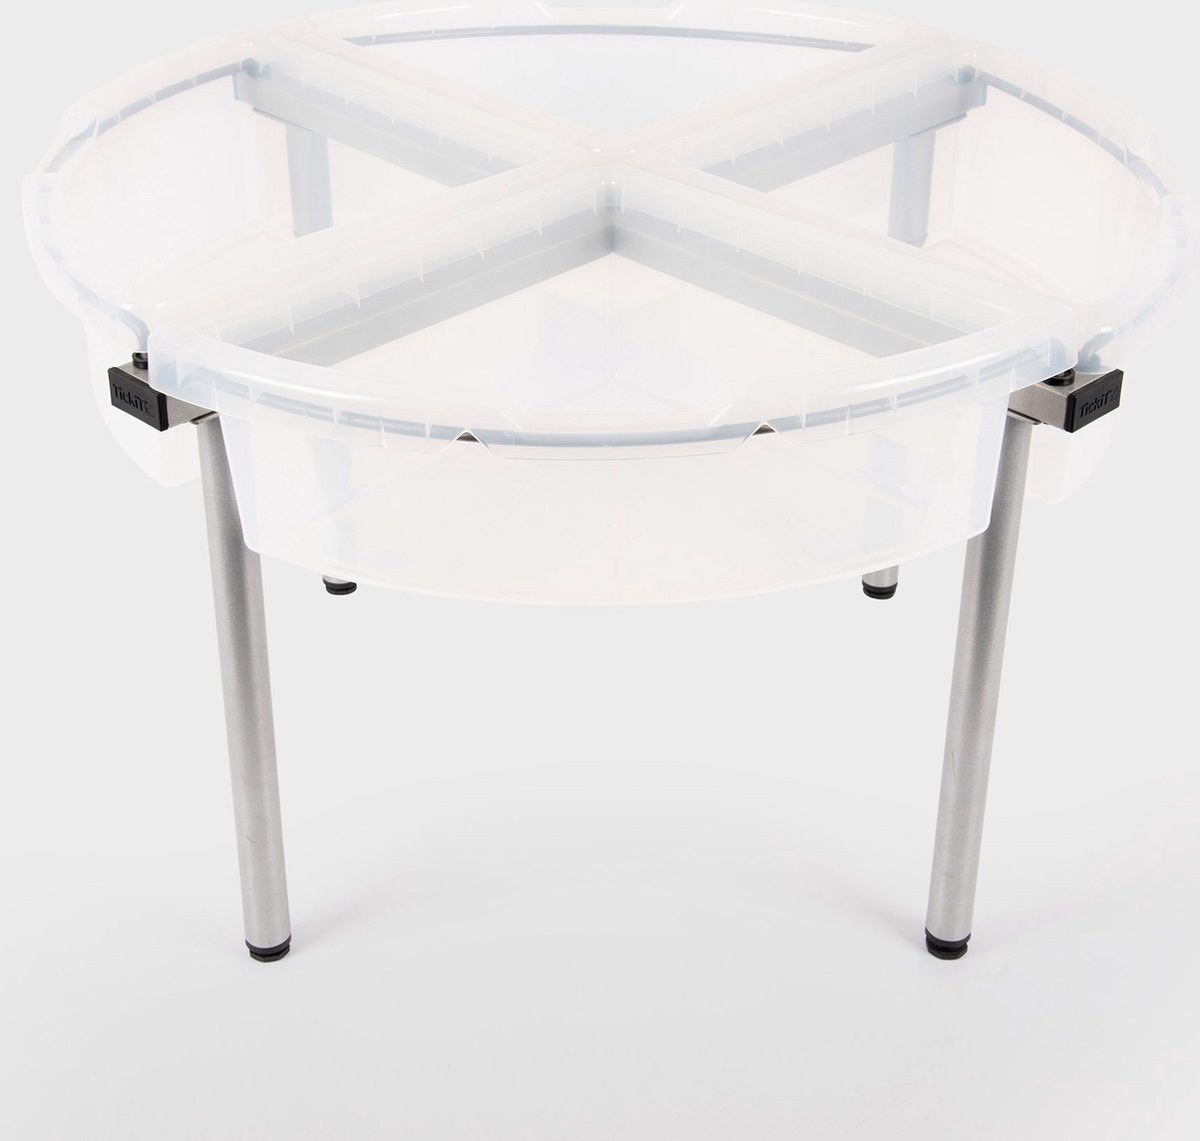 Tickit Exploration Circle Tray stand